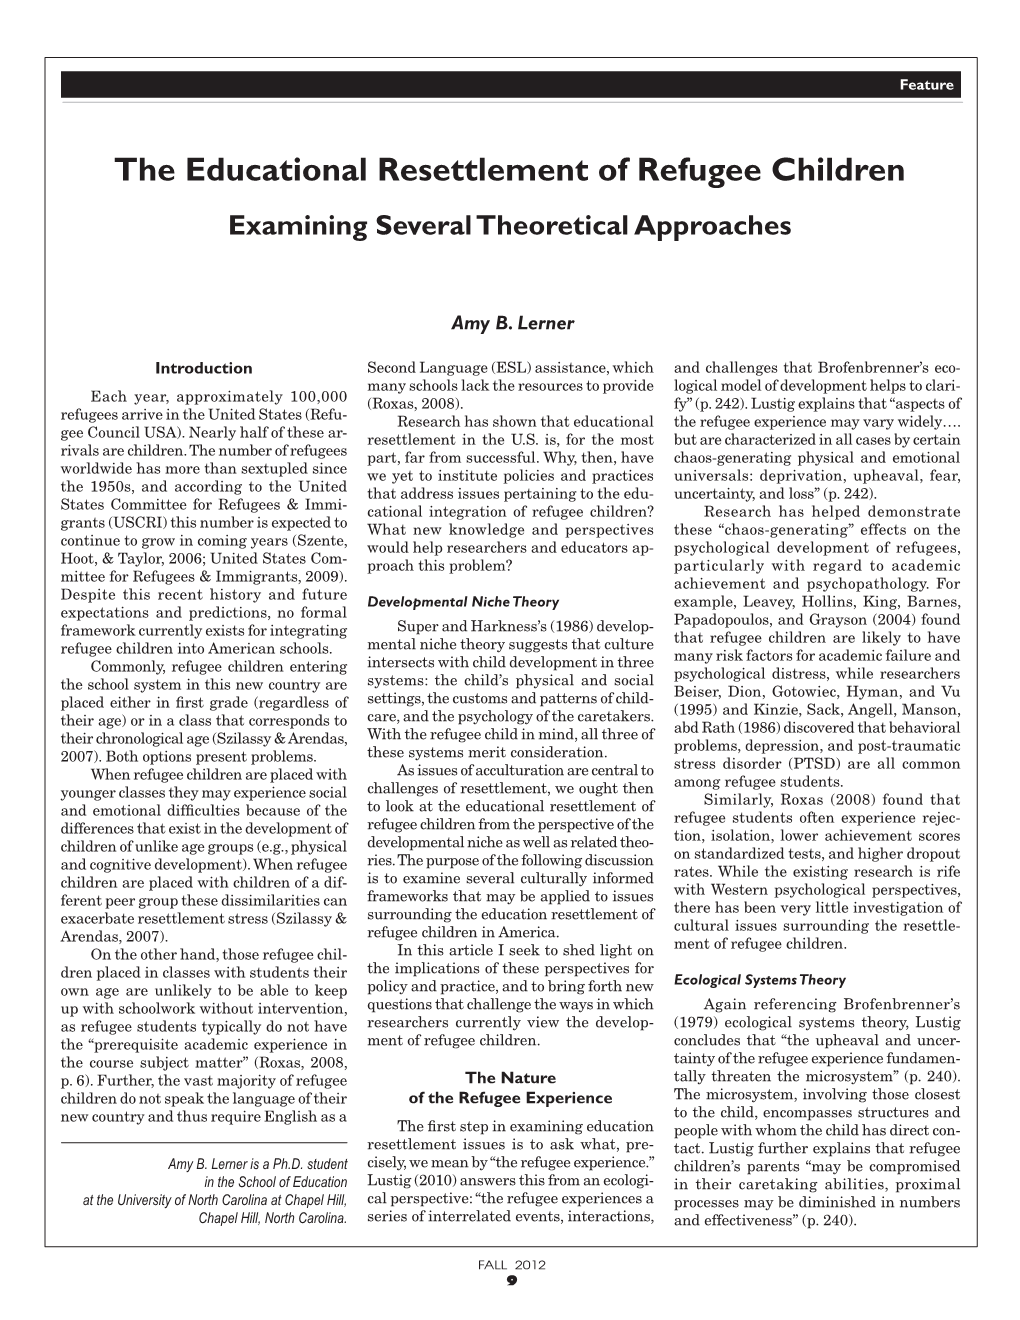 The Educational Resettlement of Refugee Children Examining Several Theoretical Approaches